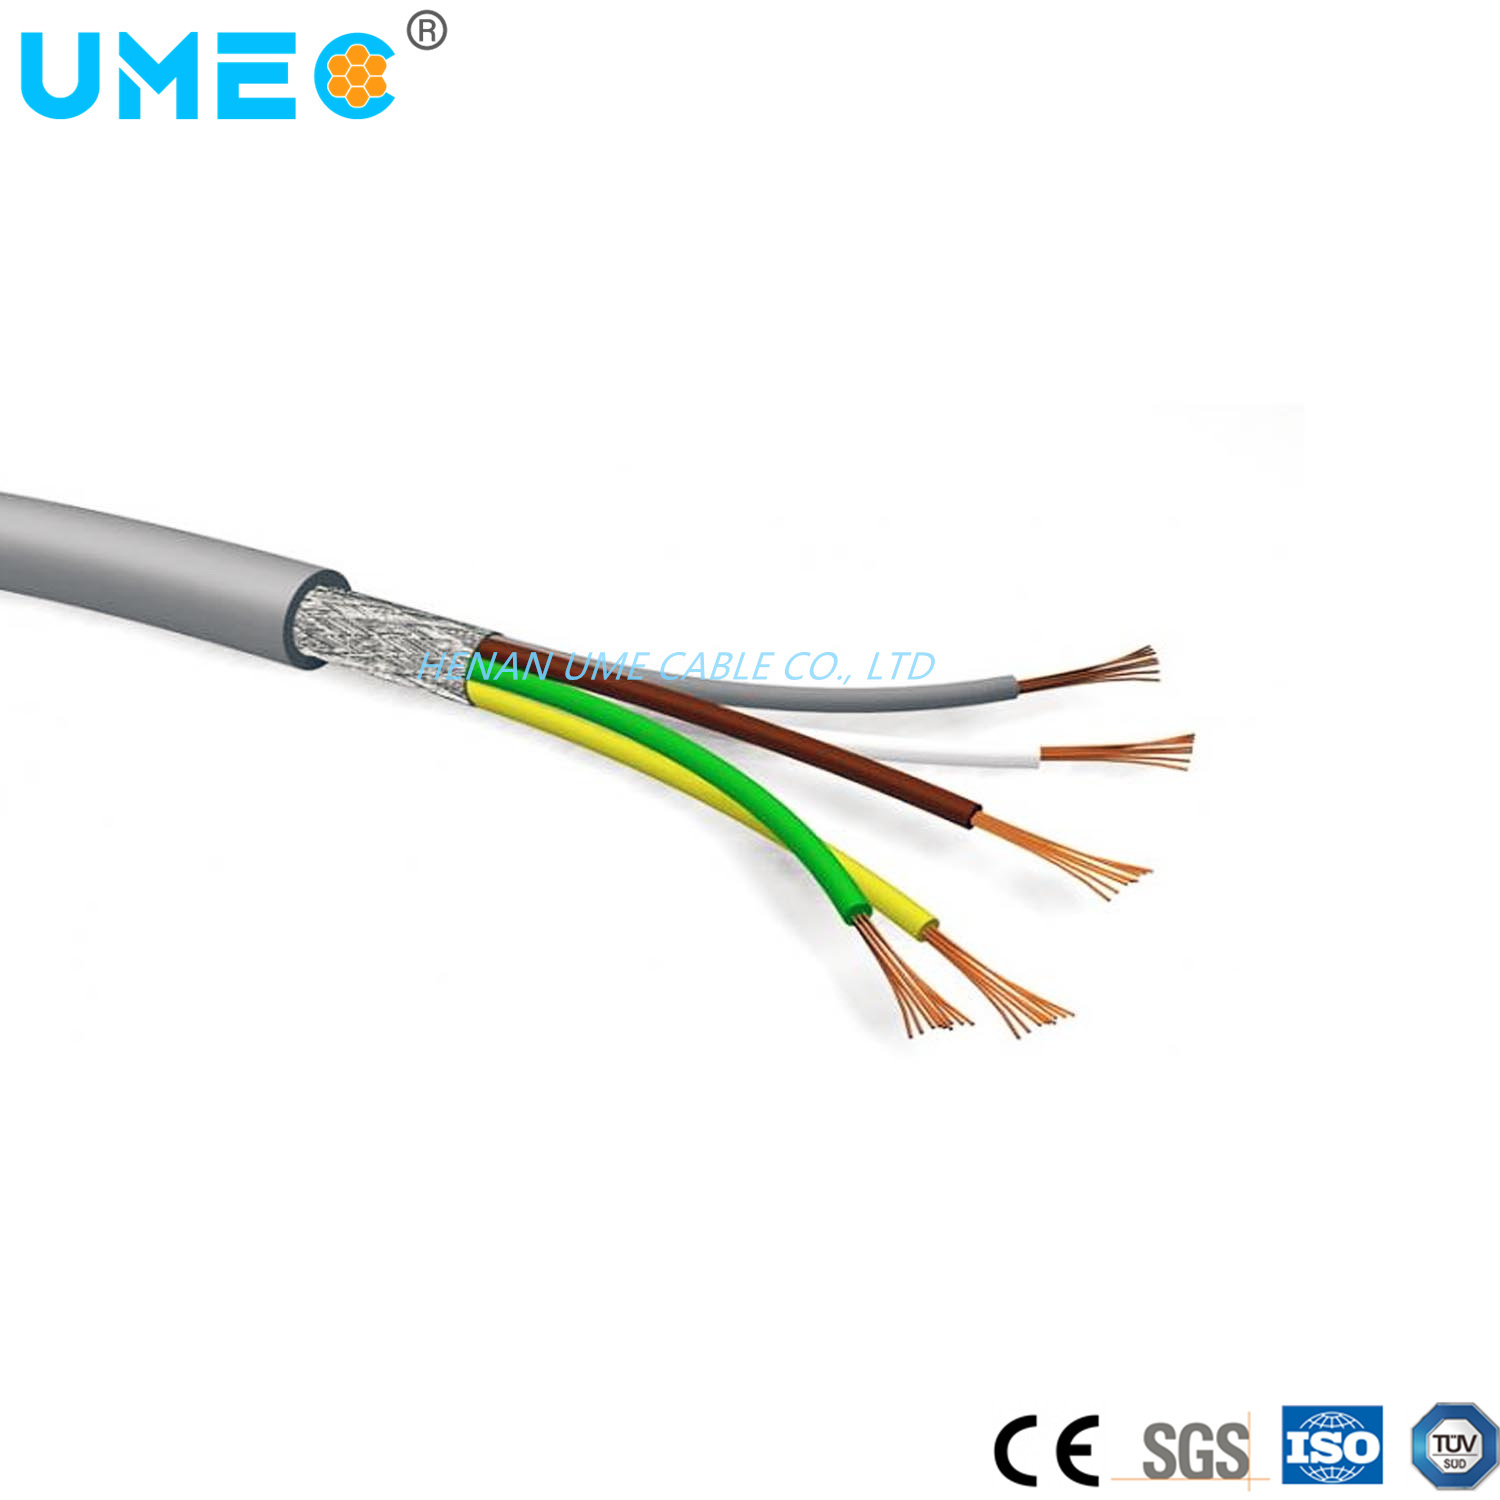 Liycy 2X0.25mm PVC Multicore Communication Shielded Cable